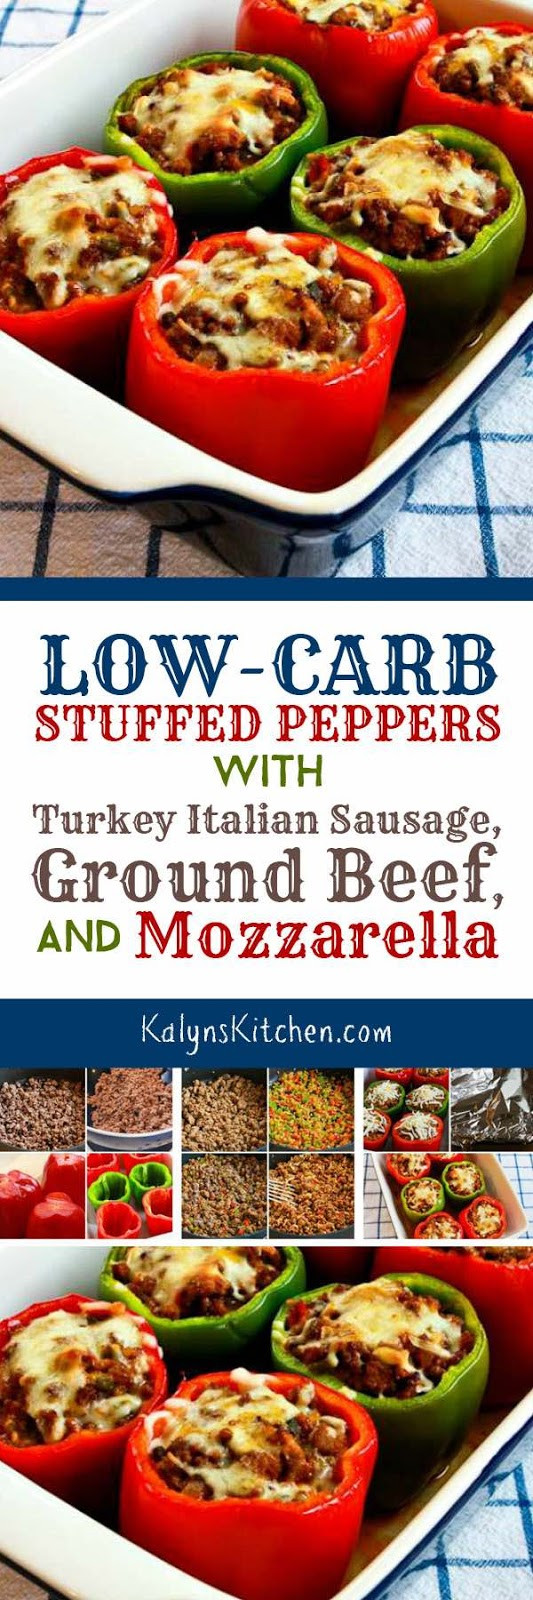 Low Carb Stuffed Peppers Recipe With Ground Beef
 Low Carb Stuffed Peppers with Turkey Italian Sausage